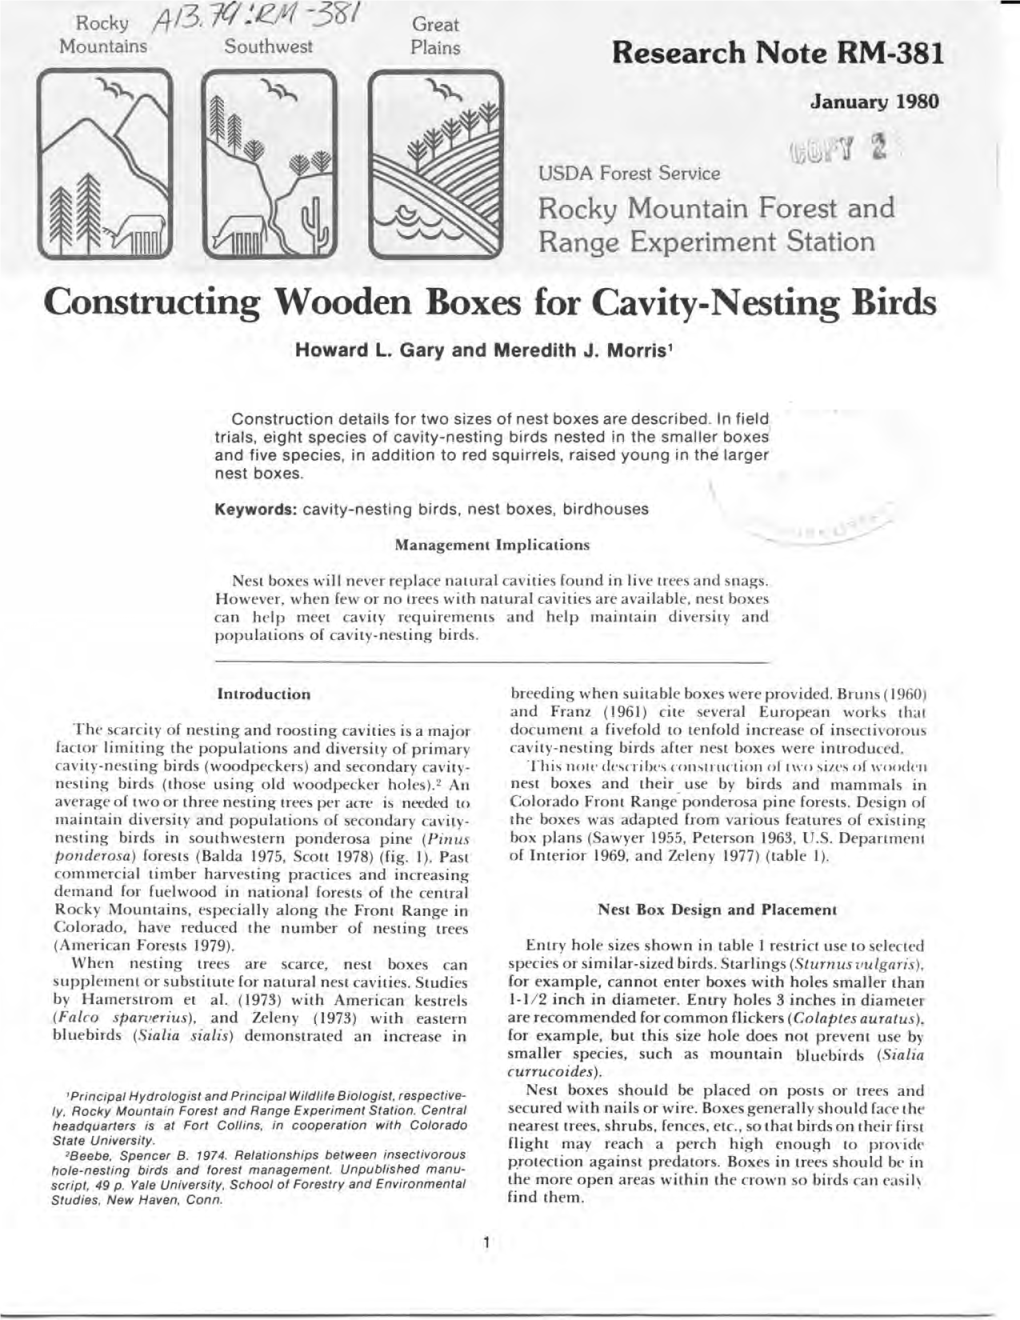 Constructing Wooden Boxes for Cavity-Nesting Birds